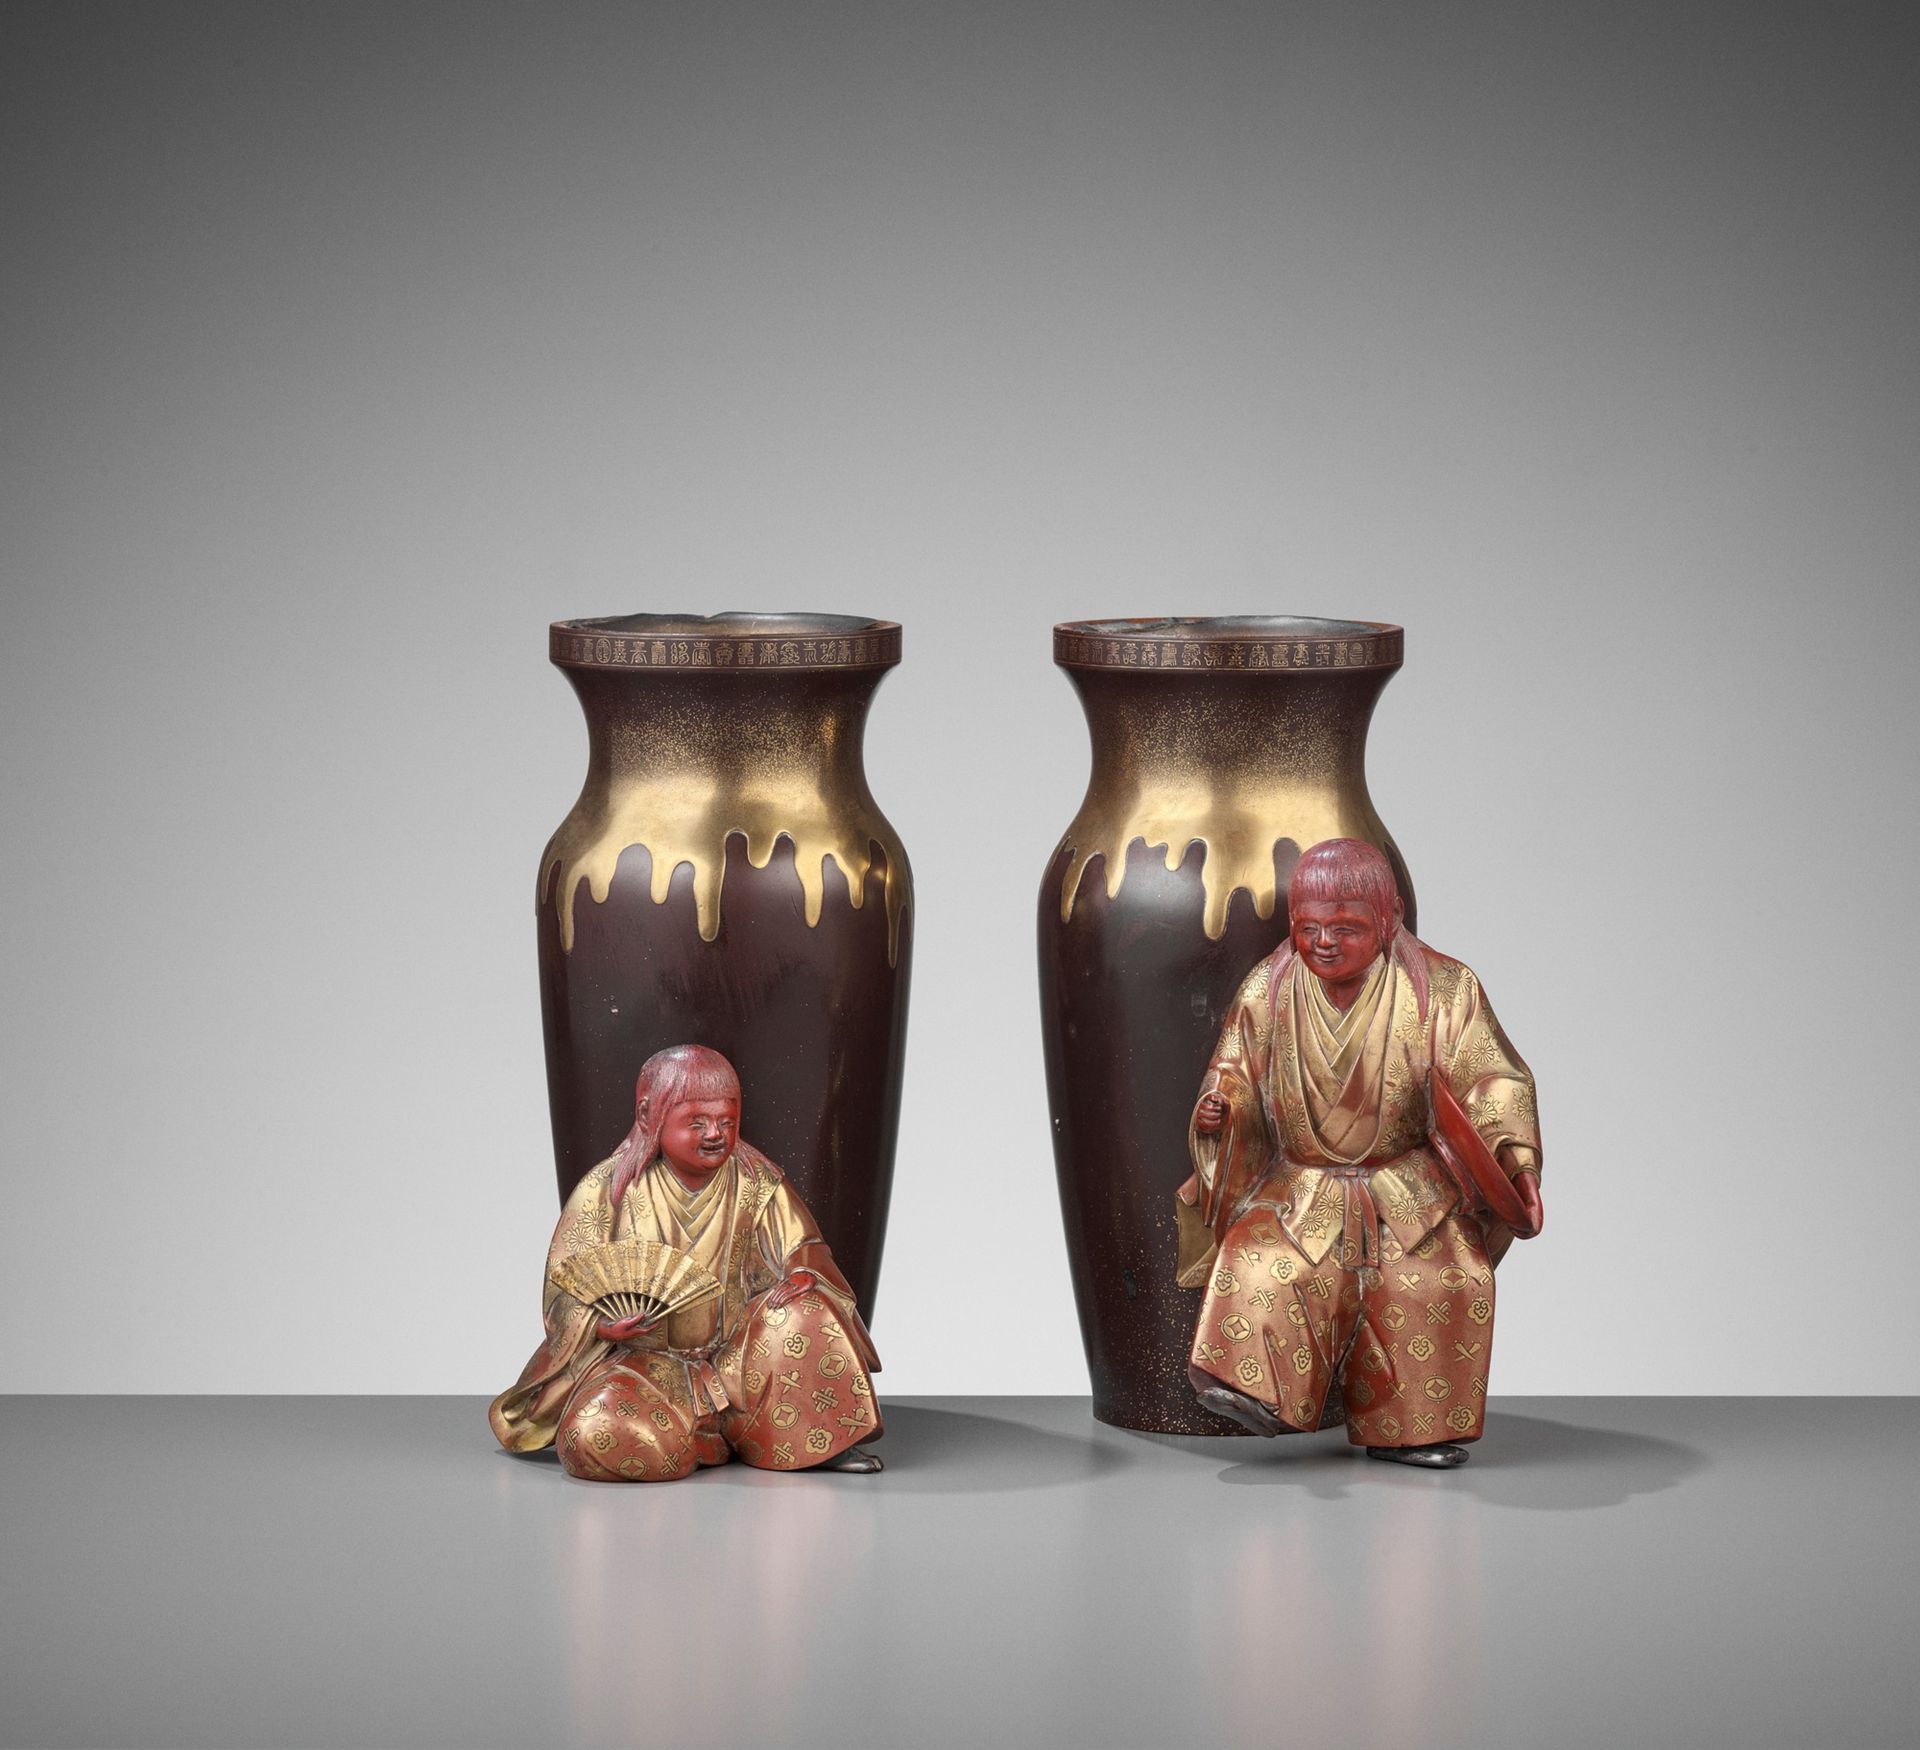 A FINE PAIR OF LACQUER VASES WITH SHOJO AND SAKE JARS 一对精美的酒瓶和酒壶
日本，明治时期（1868-19&hellip;